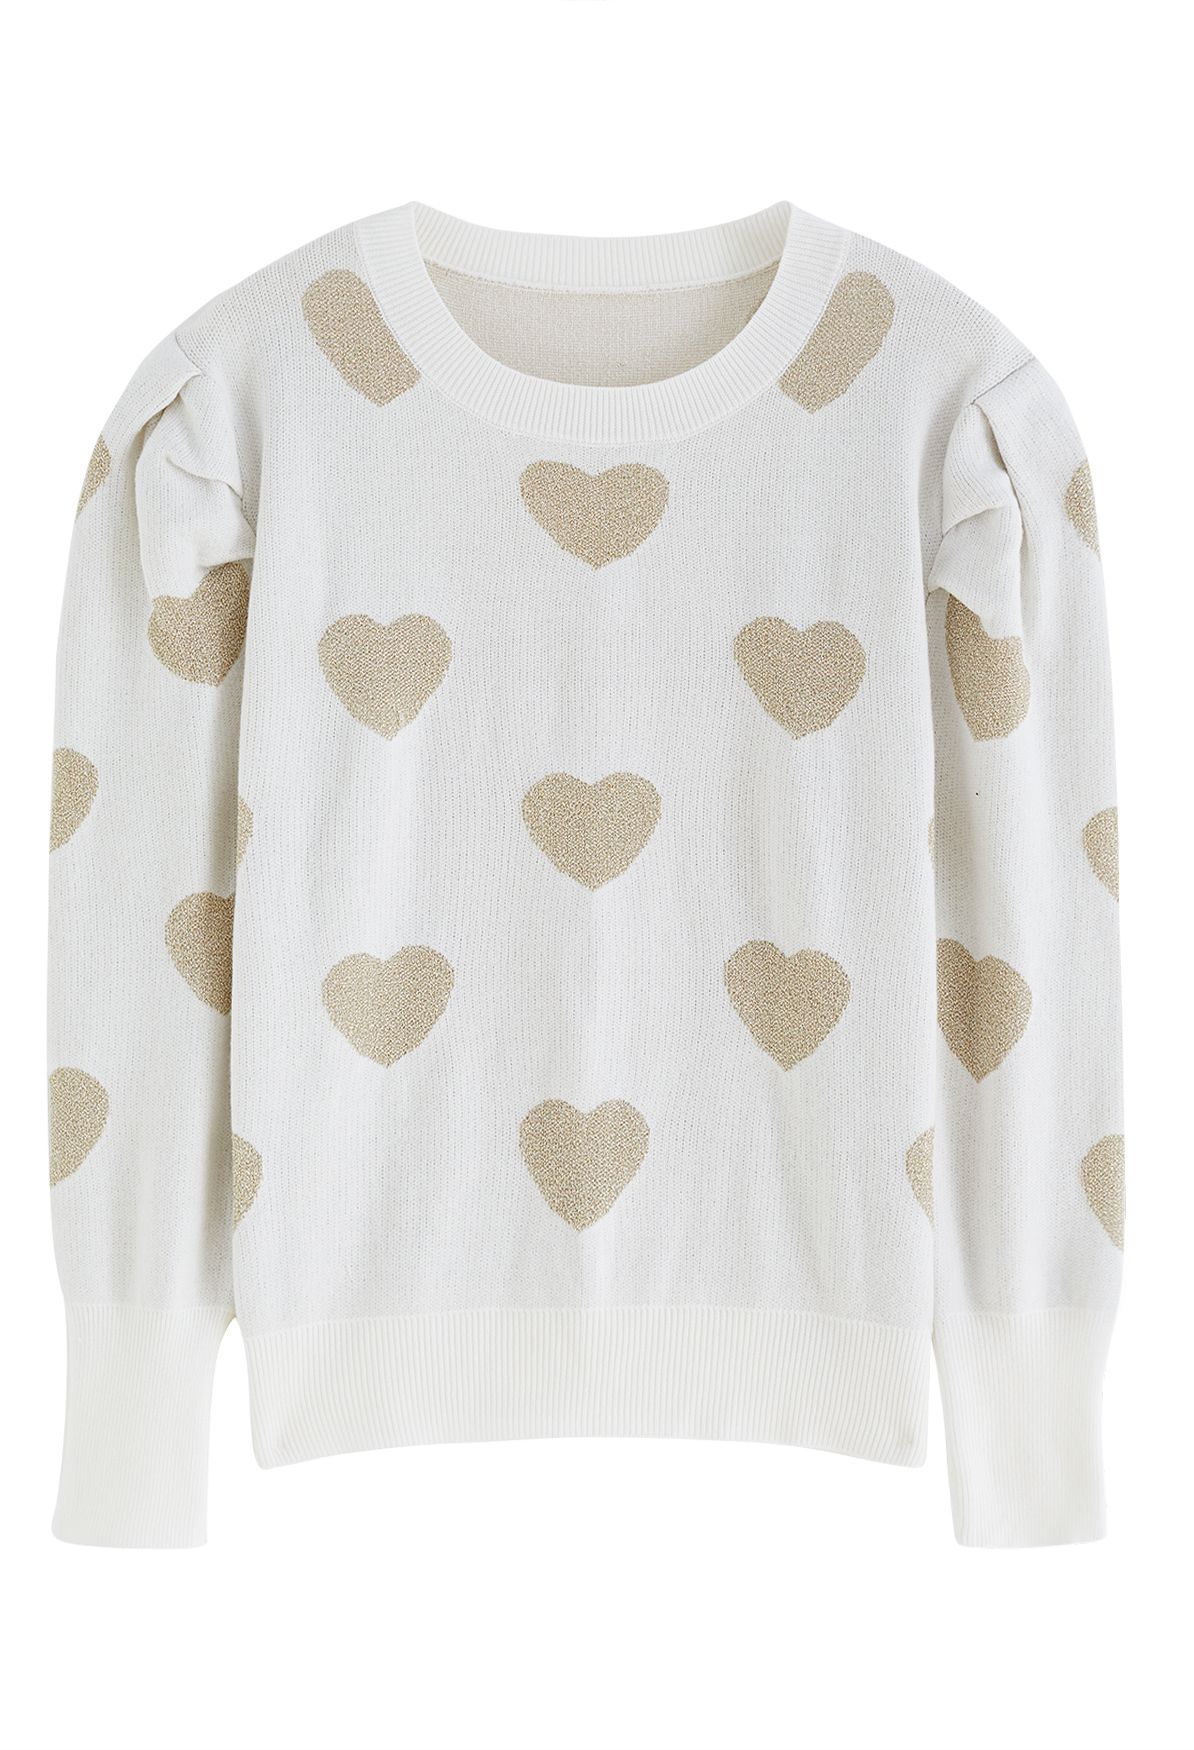 Metallic Heart Puff Shoulder Knit Sweater in Ivory | Chicwish